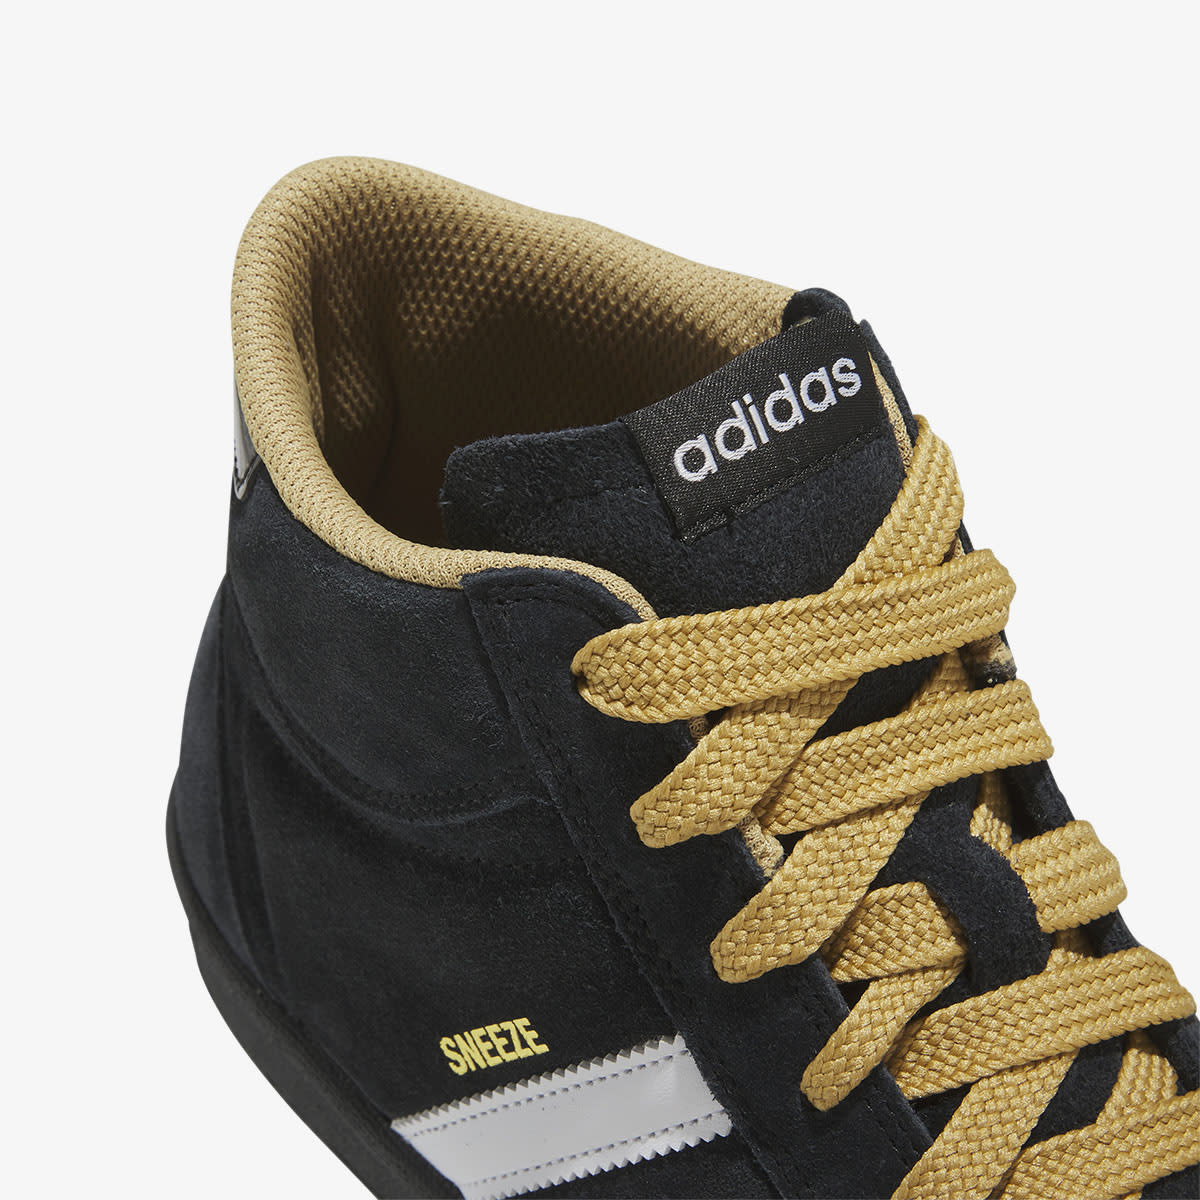 Adidas Sneeze Superskate (Black, White & Golden Beige) | END. Launches